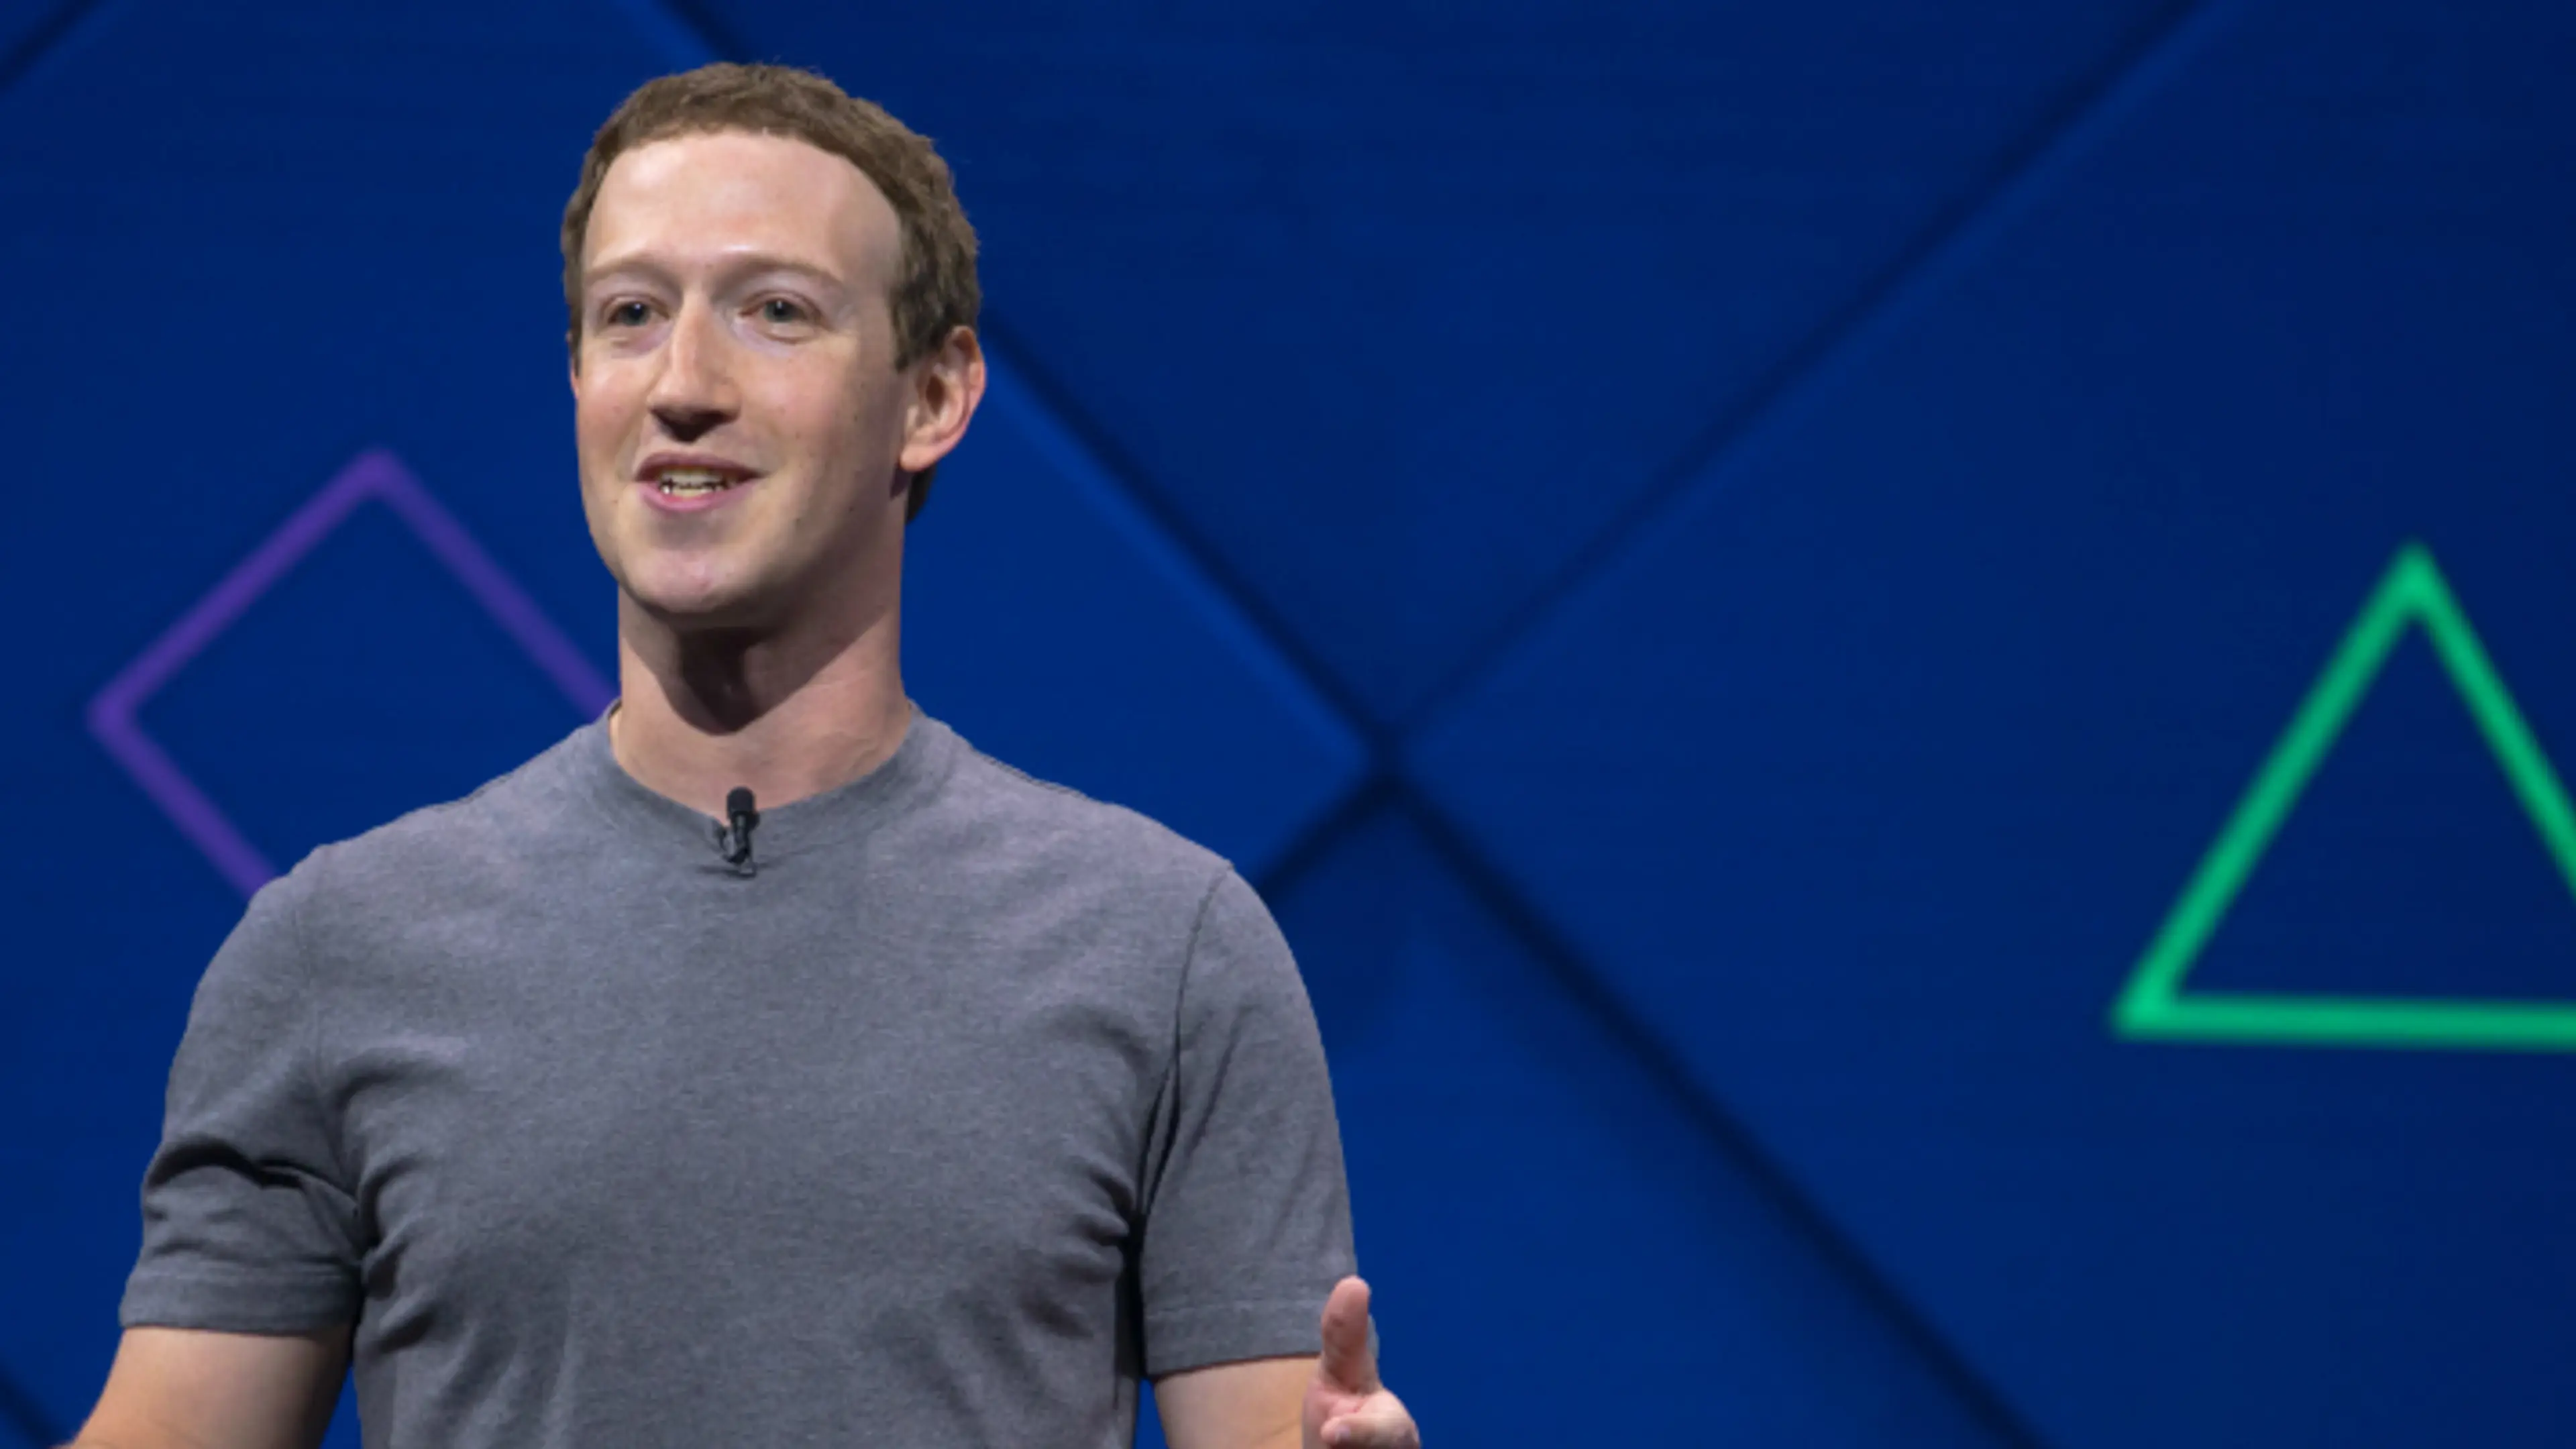 Metaverse to replace mobile internet: Mark Zuckerberg unveils AI research at Meta's 'Inside the Lab' event